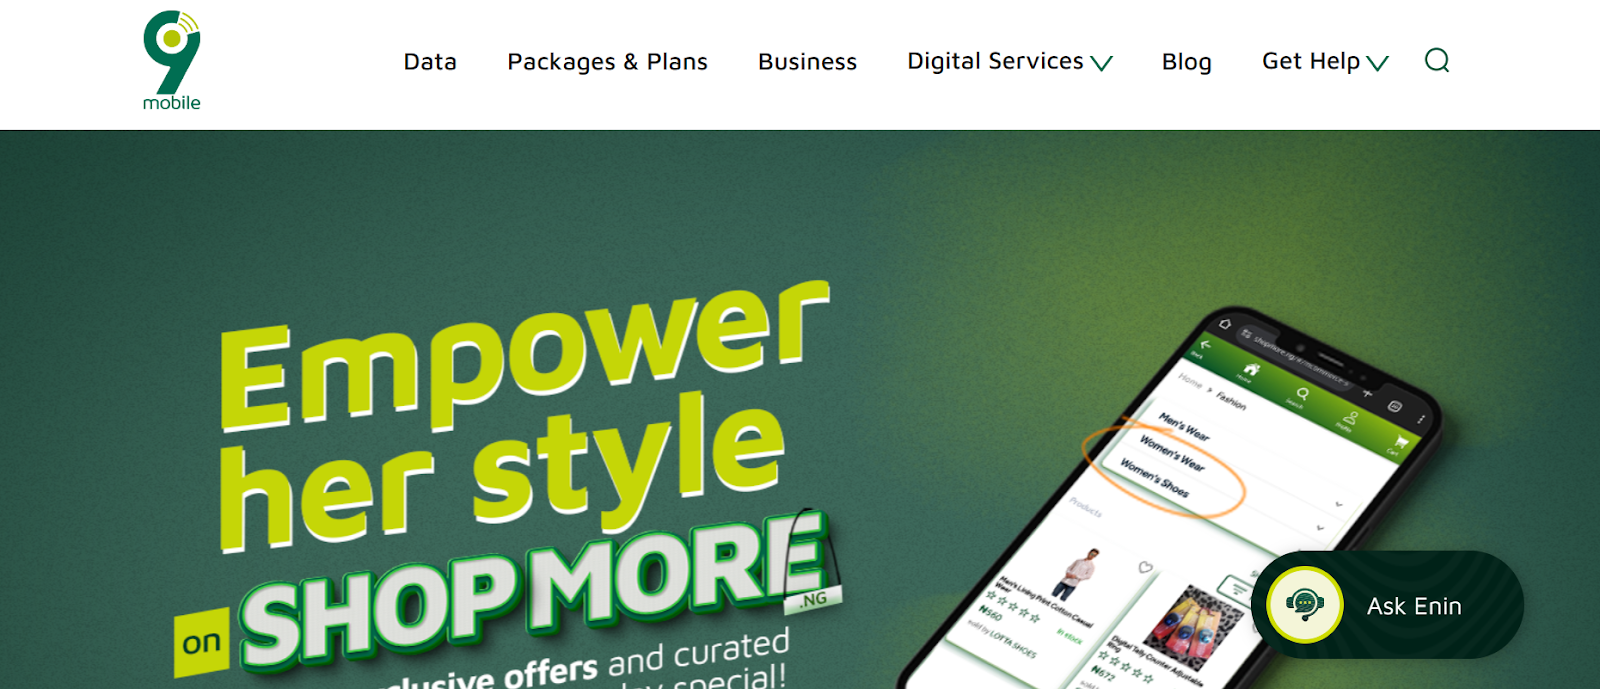 9mobile Nigeria website snapshot highlighting the services it offers.